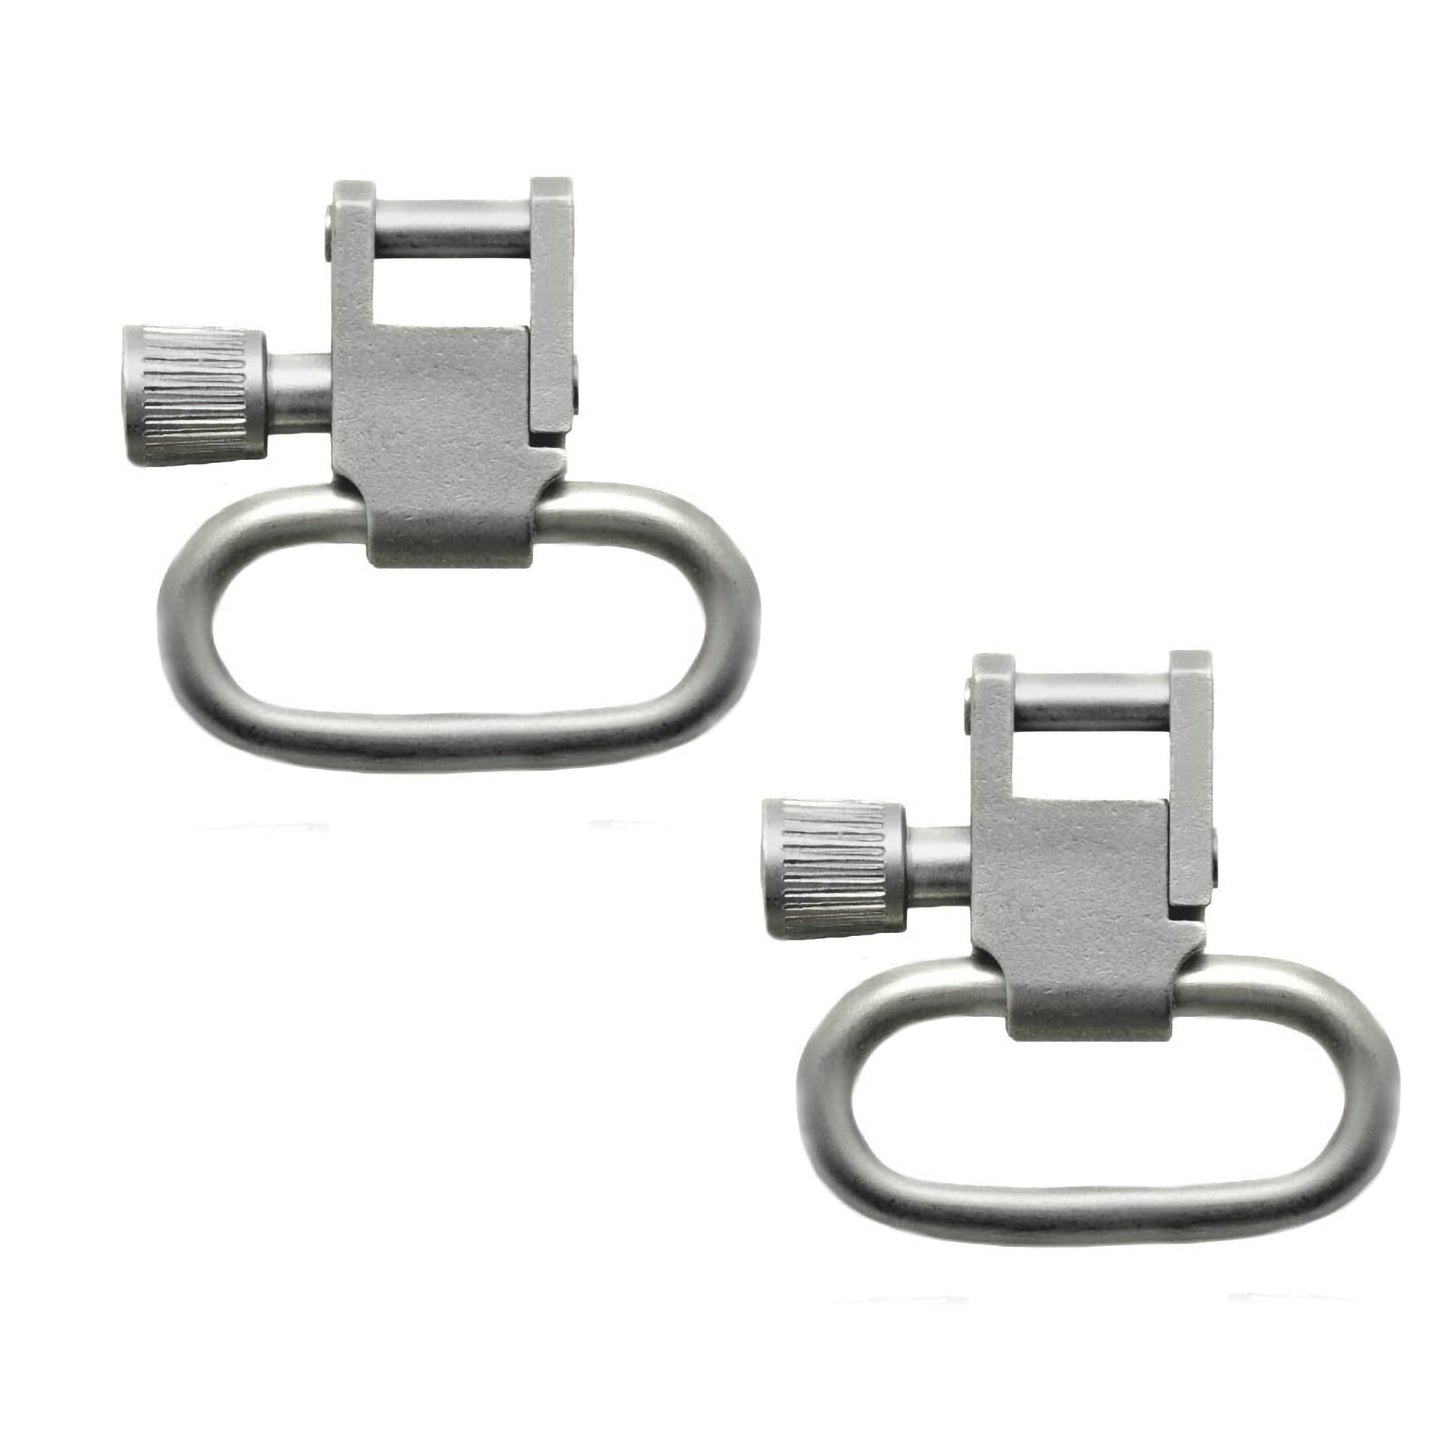 Stainless Steel Gun Sling Swivels 1 Inch or 1.25 Inch Width (Price includes shipping)